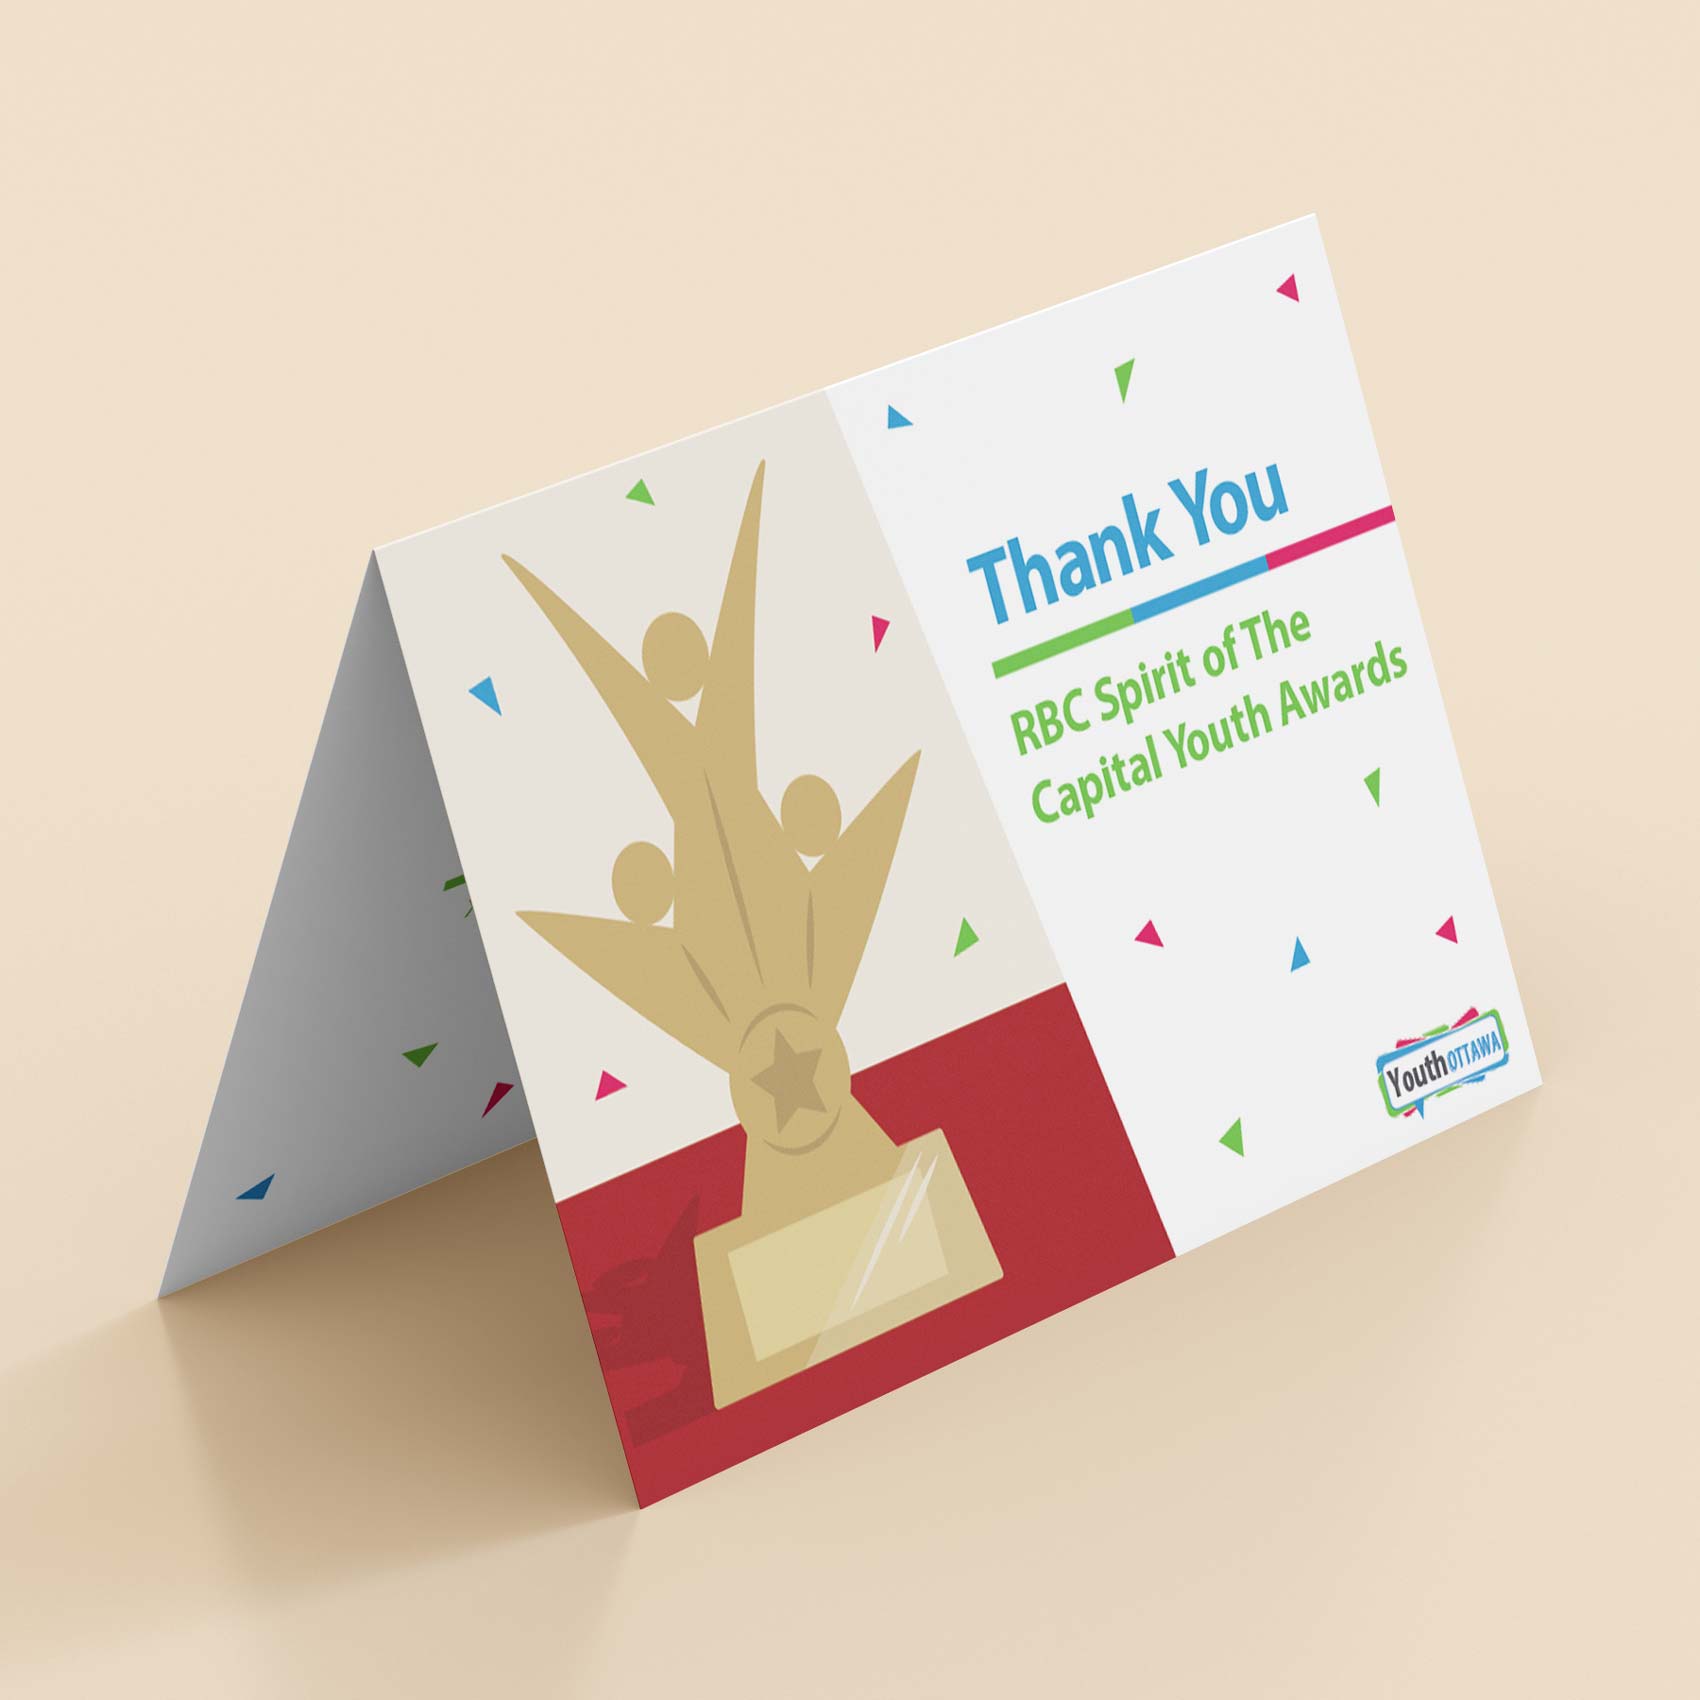 This is a picture of a thank you card that I designed for the Youth Ottawa spirit of the capital awards. There's an illustration on the front of the award they give out at this event.